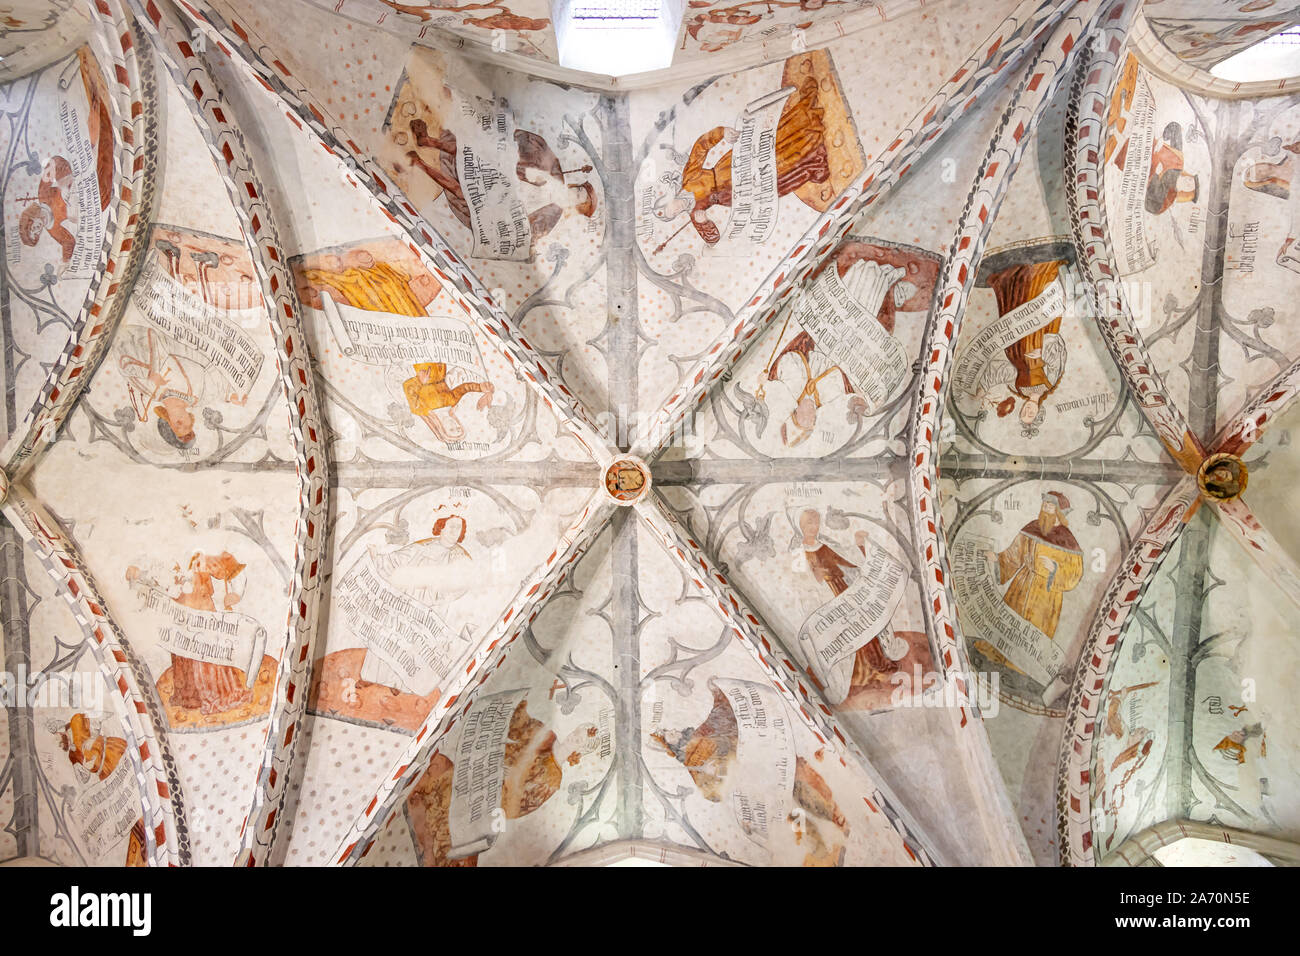 June 29, 2019 Painting of the ceiling of the Bishops' Palace, Saint Lizier, Ariège department, Pyrenees, Occitanie, France Stock Photo